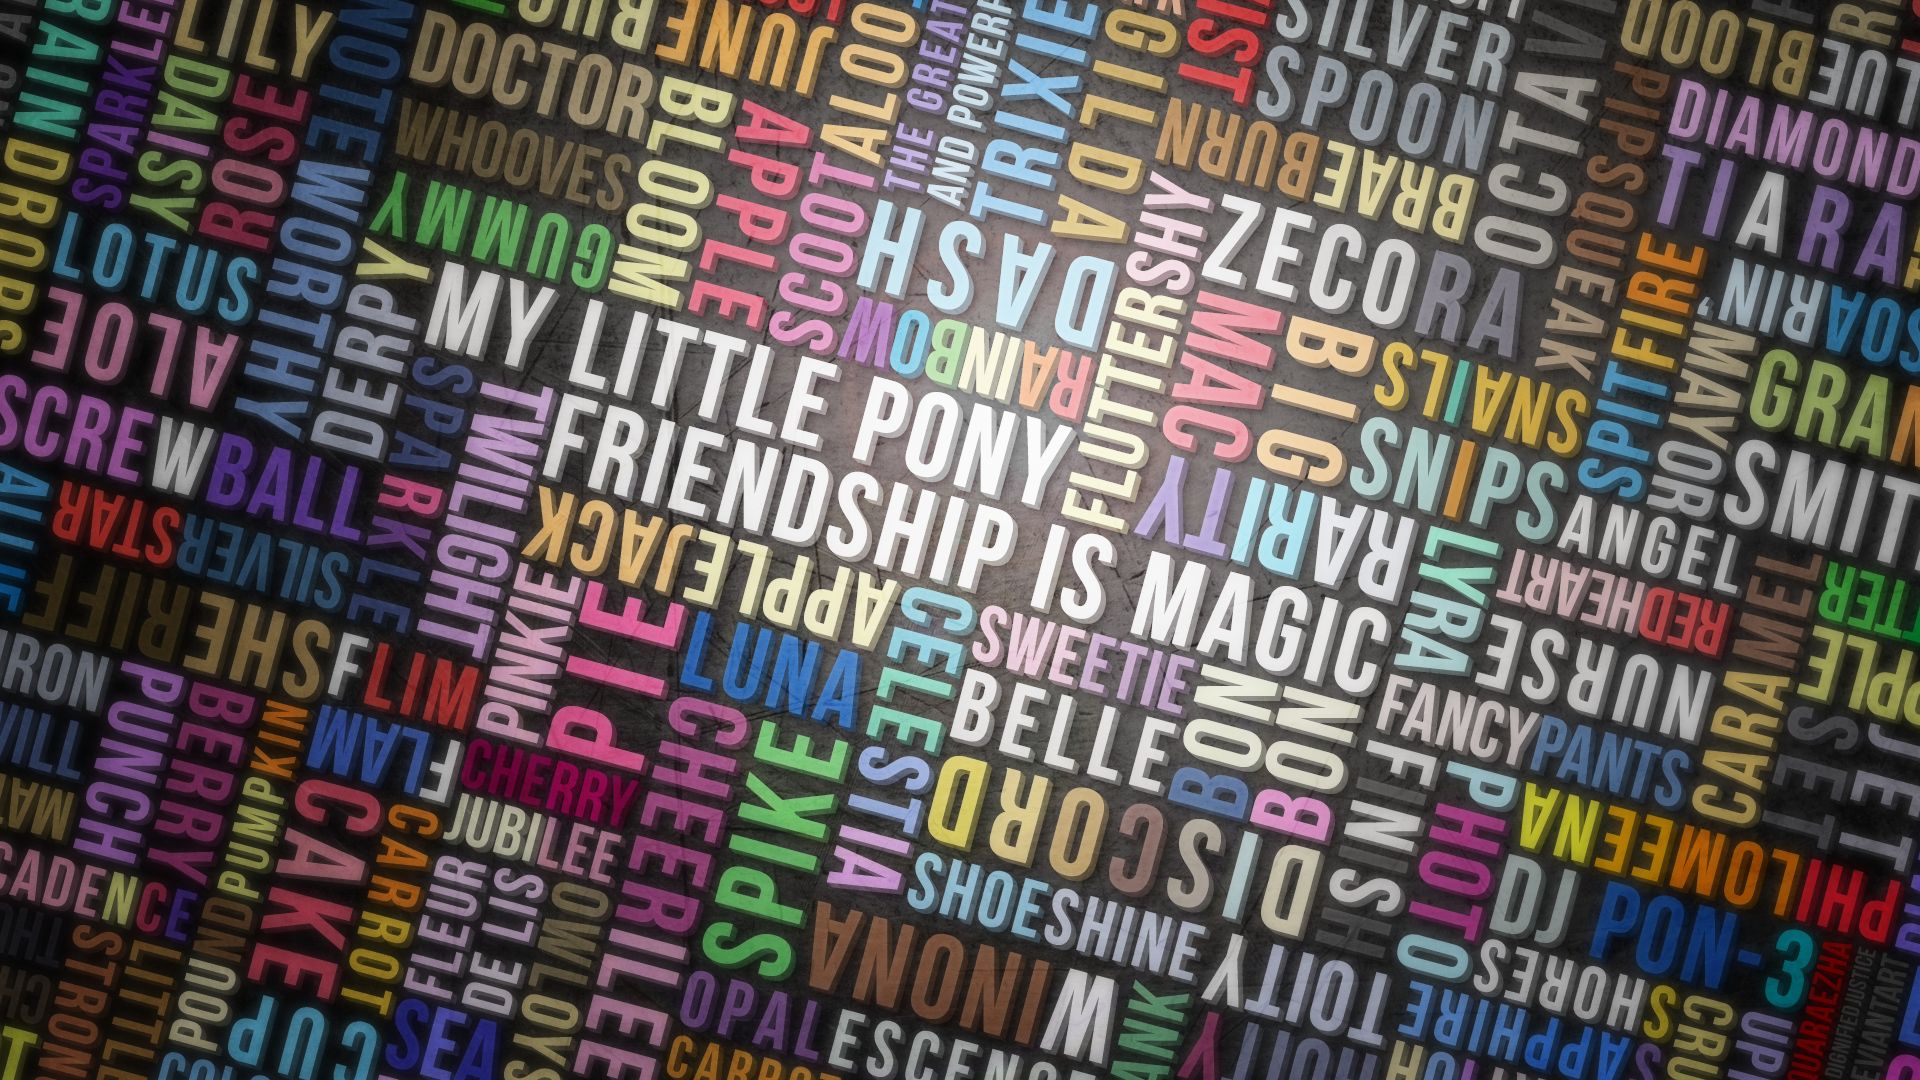 my little pony: friendship is magic, tv show, colors, mural, my little pony, typography